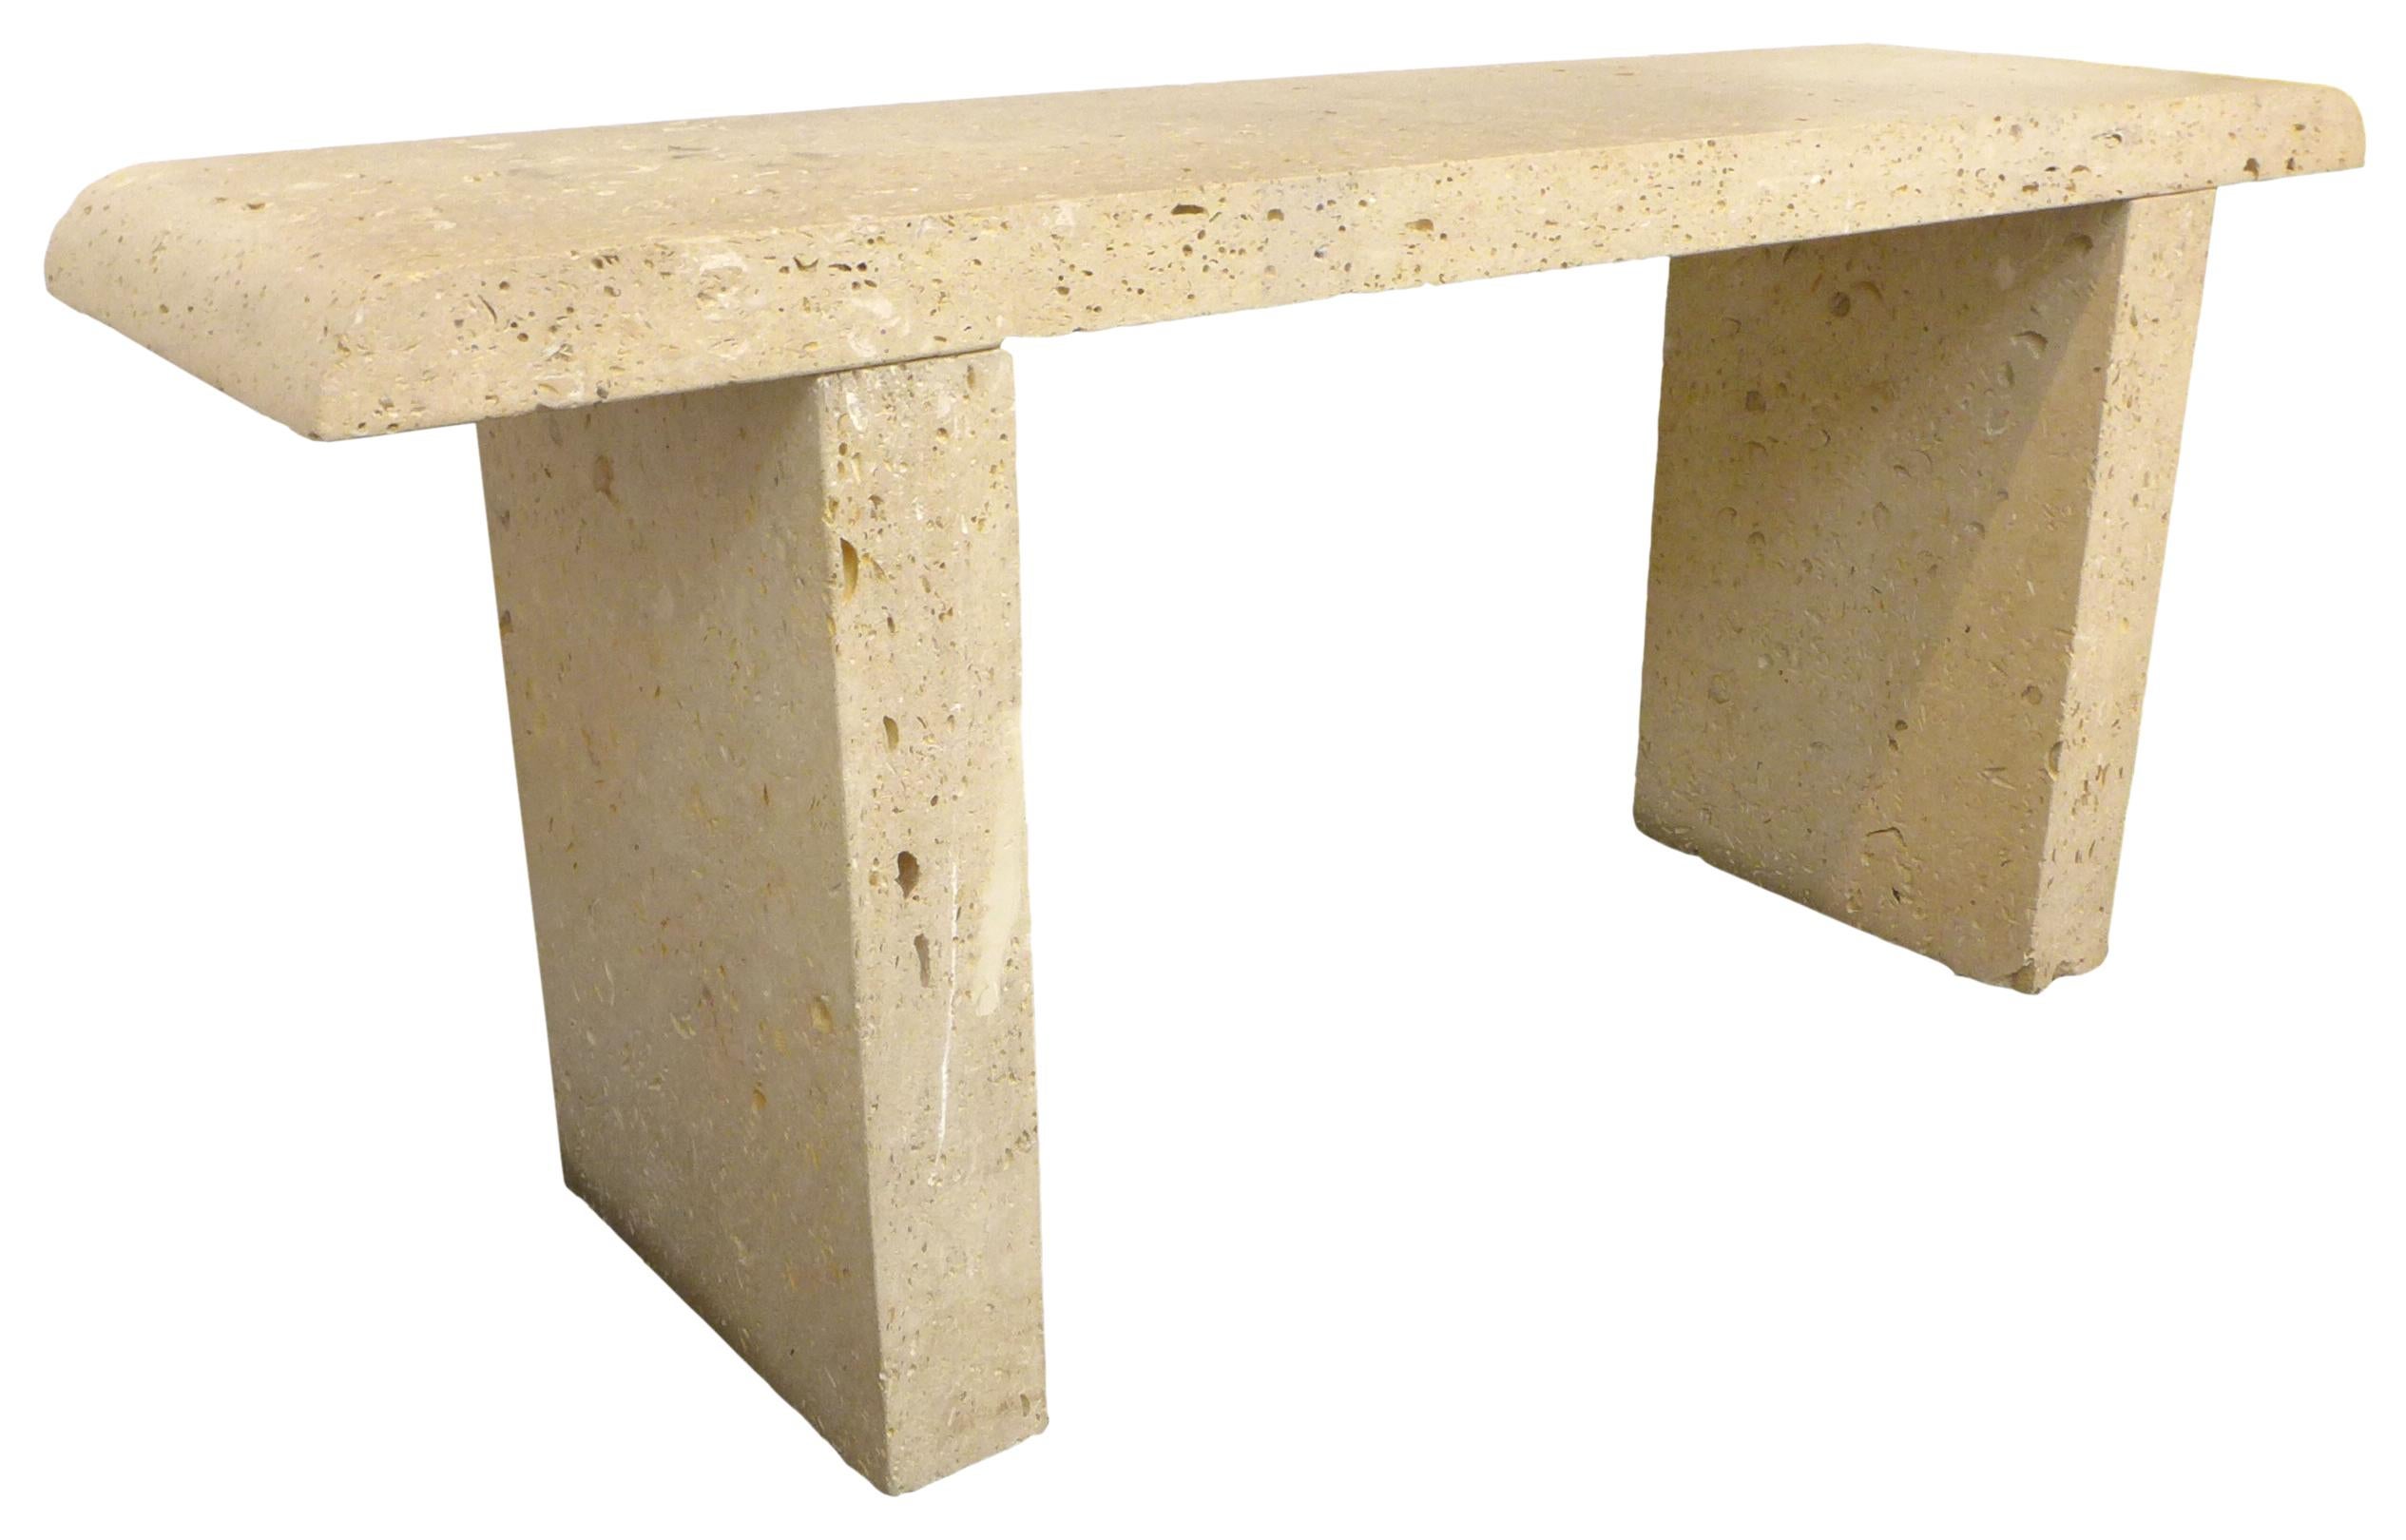 A simple, but decoratively powerful, limestone slab console table. Minimalist in form with a subtle, radiused top-ends detail. A fine example of a beautiful, raw material presented in an elegant rectilinear form. A utilitarian and decoratively